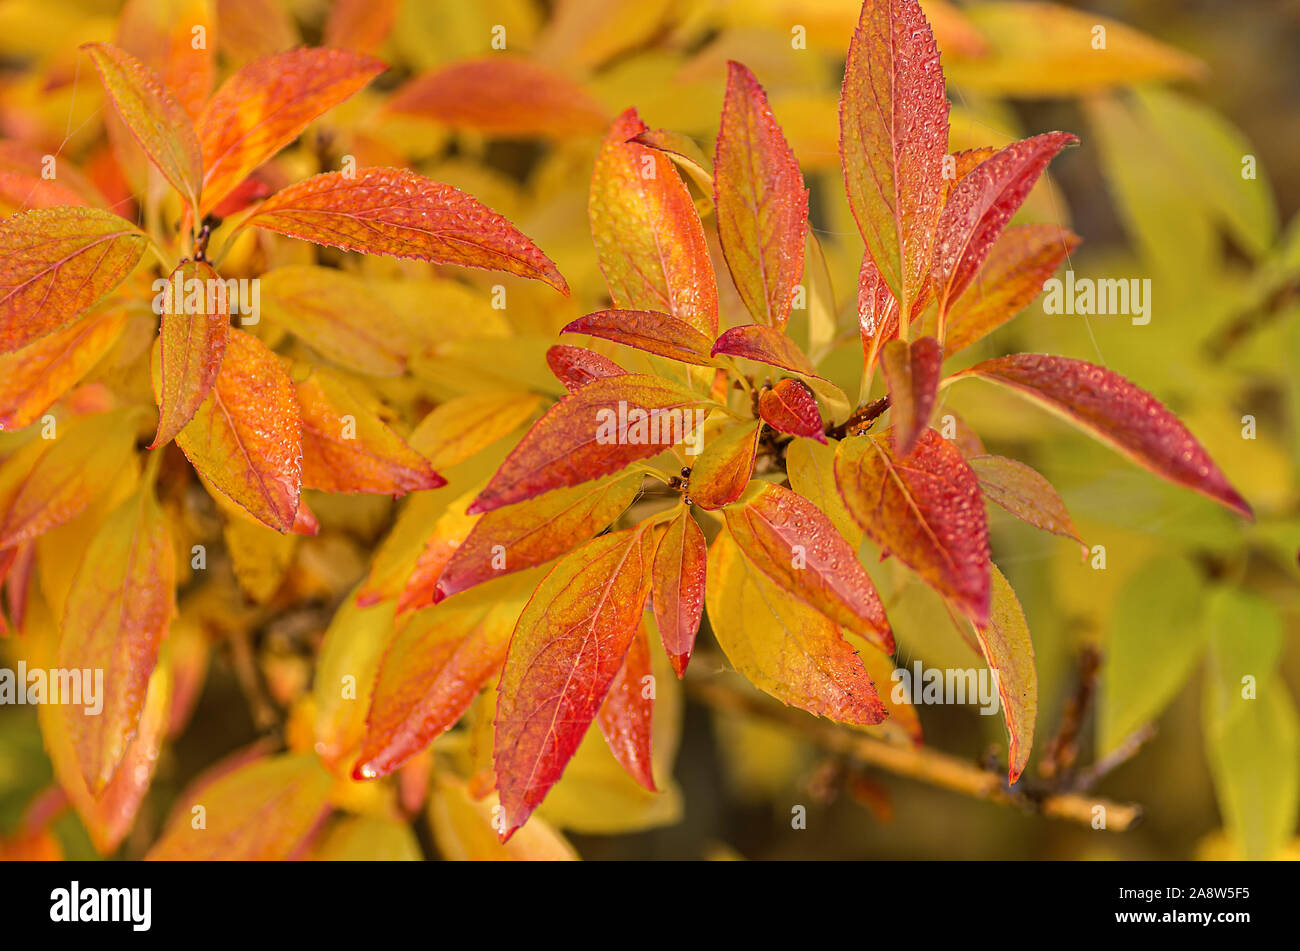 Bright Forsythia leaves with spider web on leaves. Autumn concept. Close up. Stock Photo